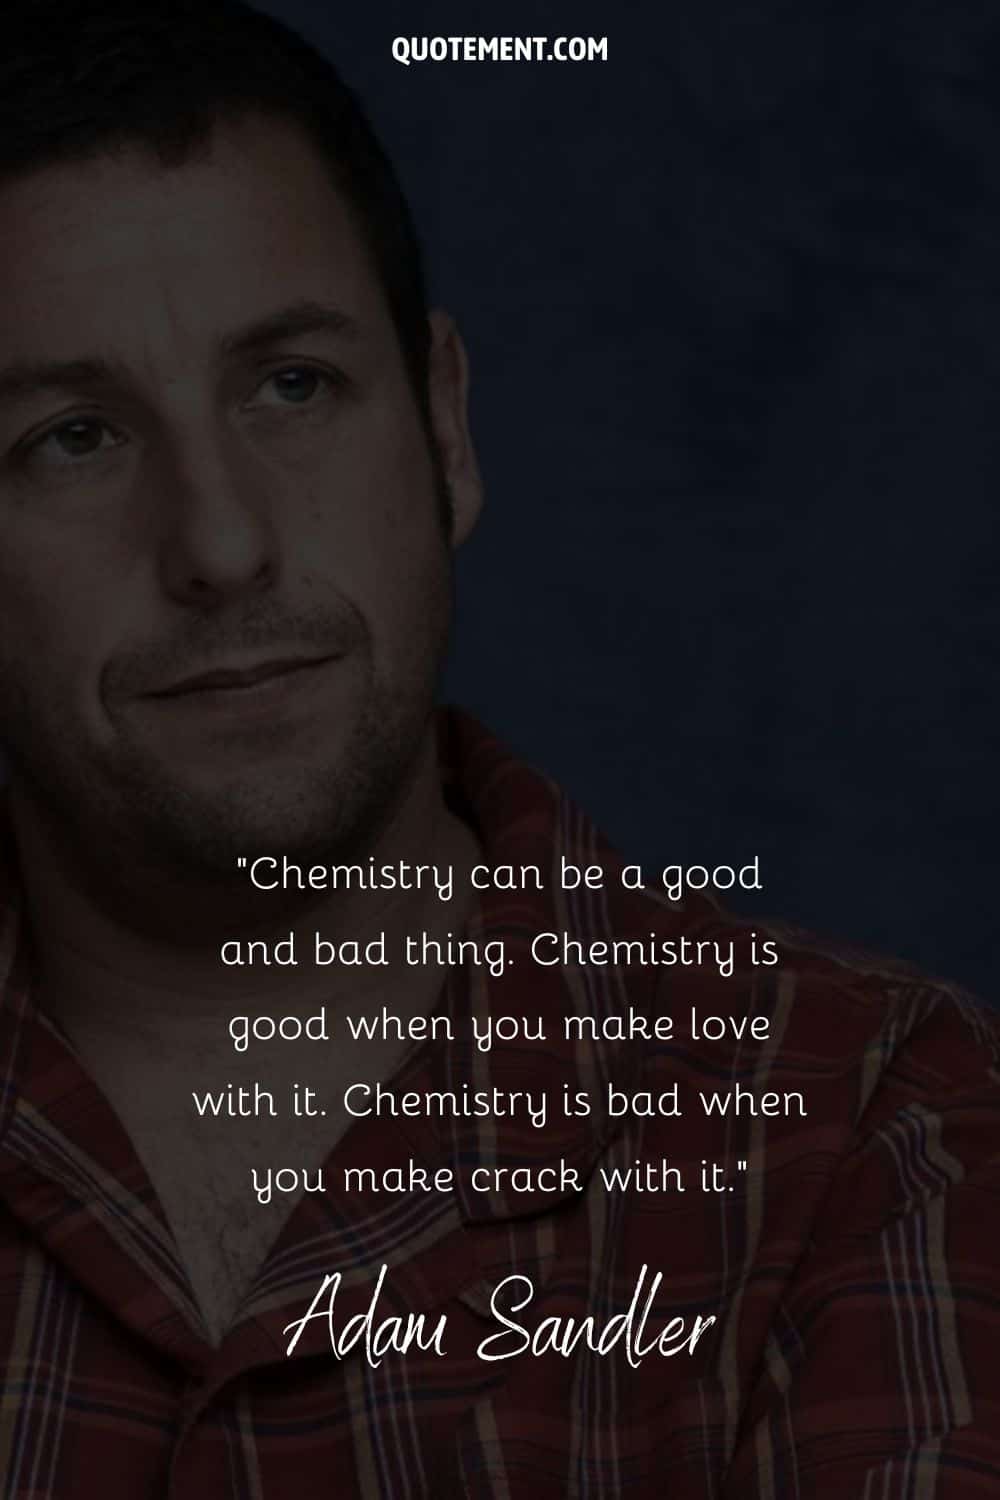 Inspirational funny quote on chemistry by Adam Sandler